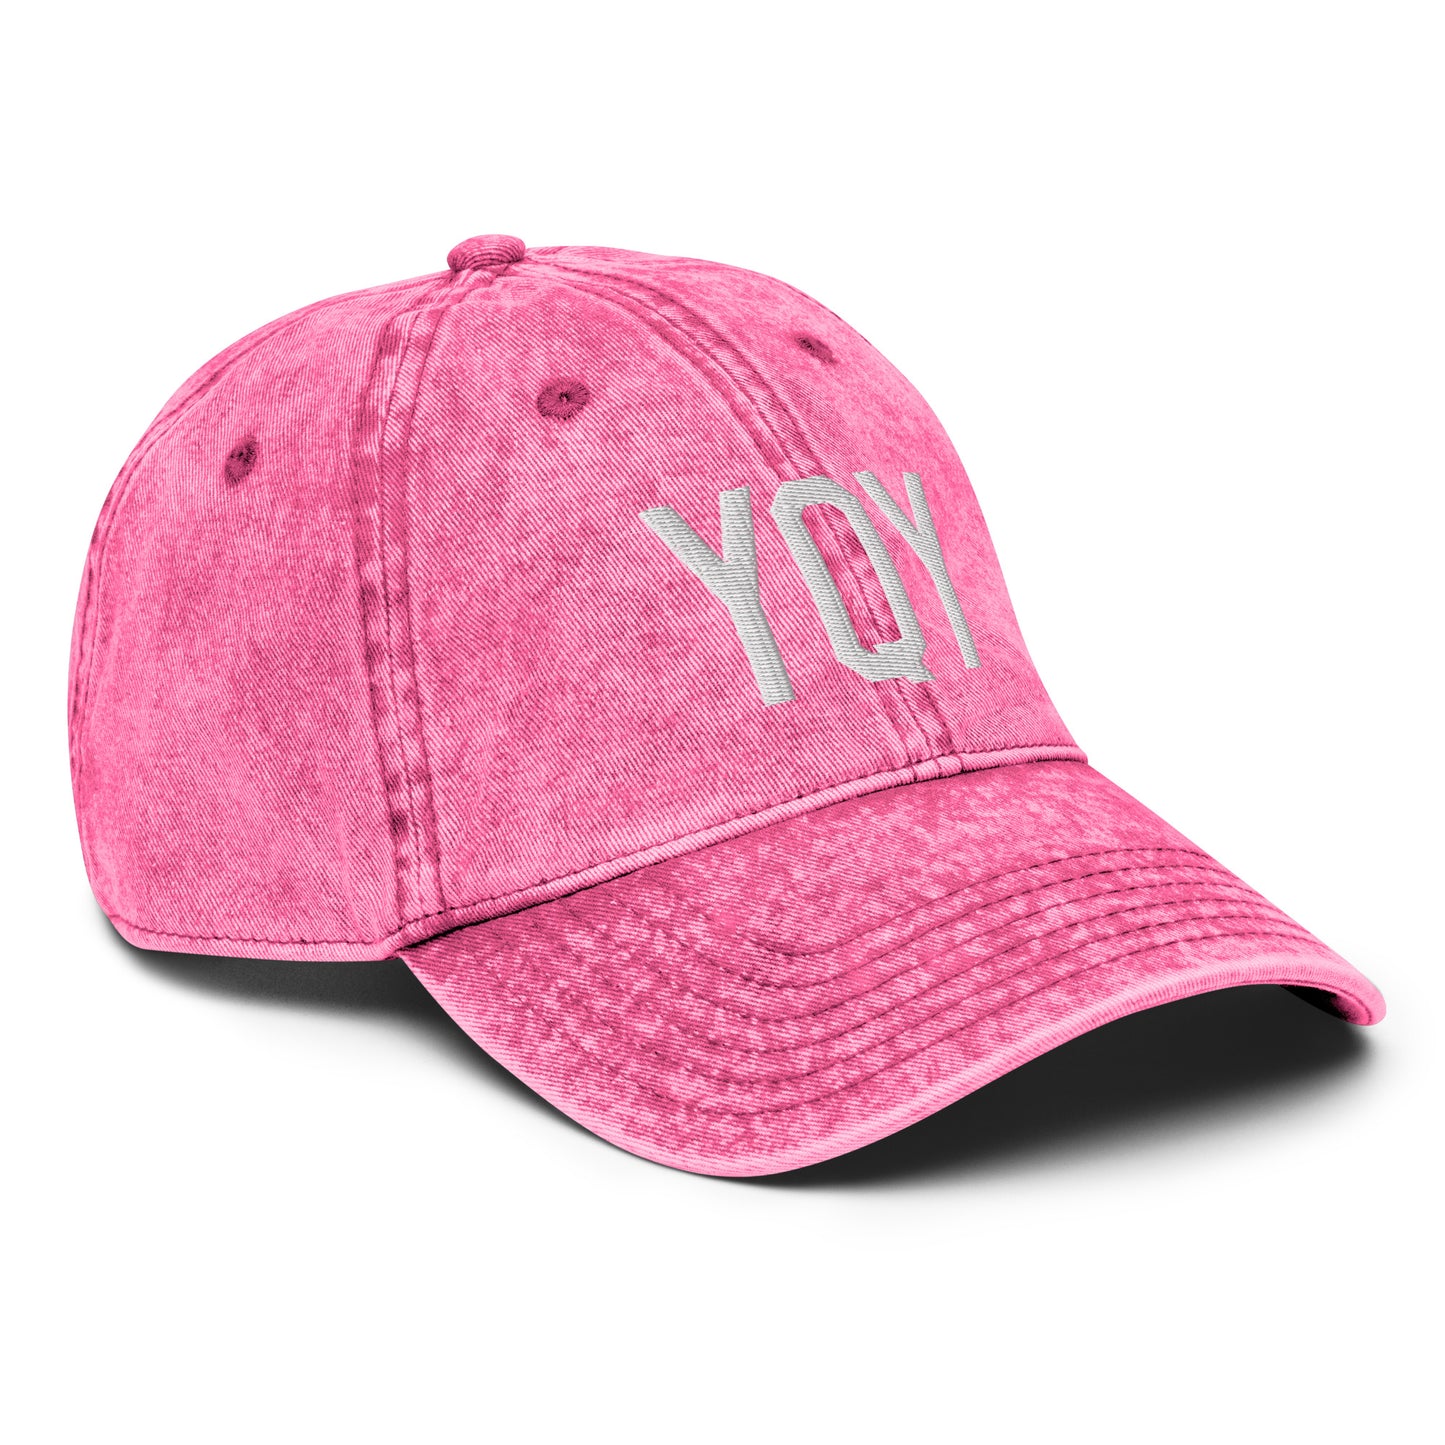 Airport Code Twill Cap - White • YQY Sydney • YHM Designs - Image 27